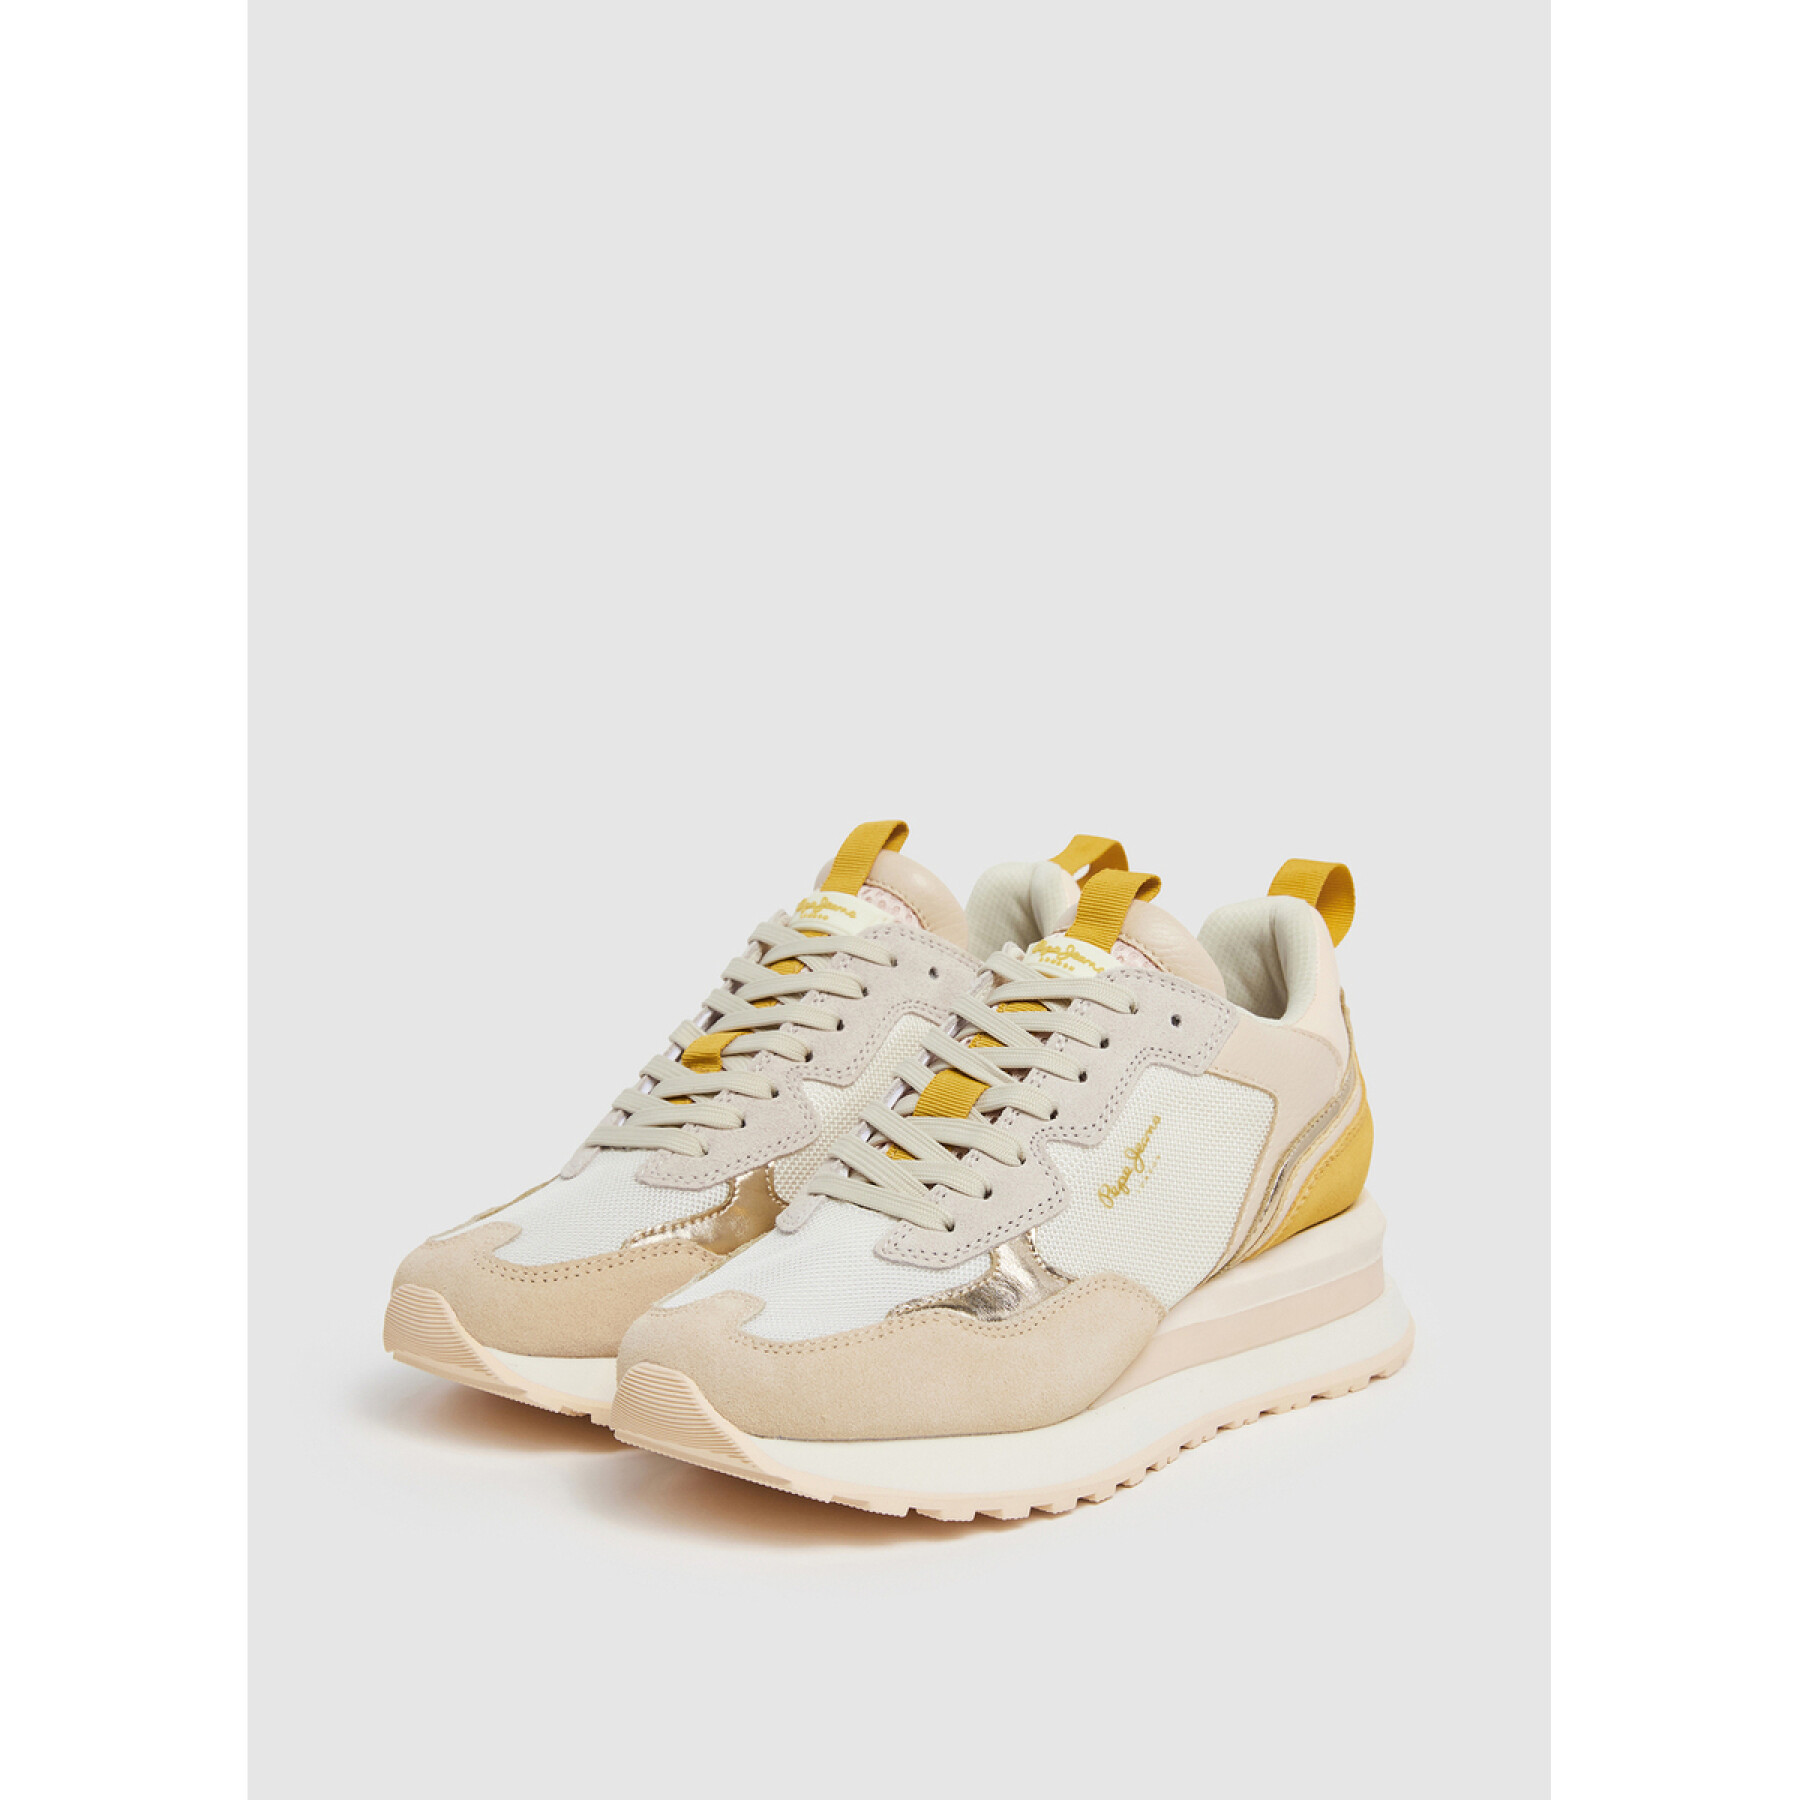 Women's low-top sneakers Pepe Jeans Blur Sour